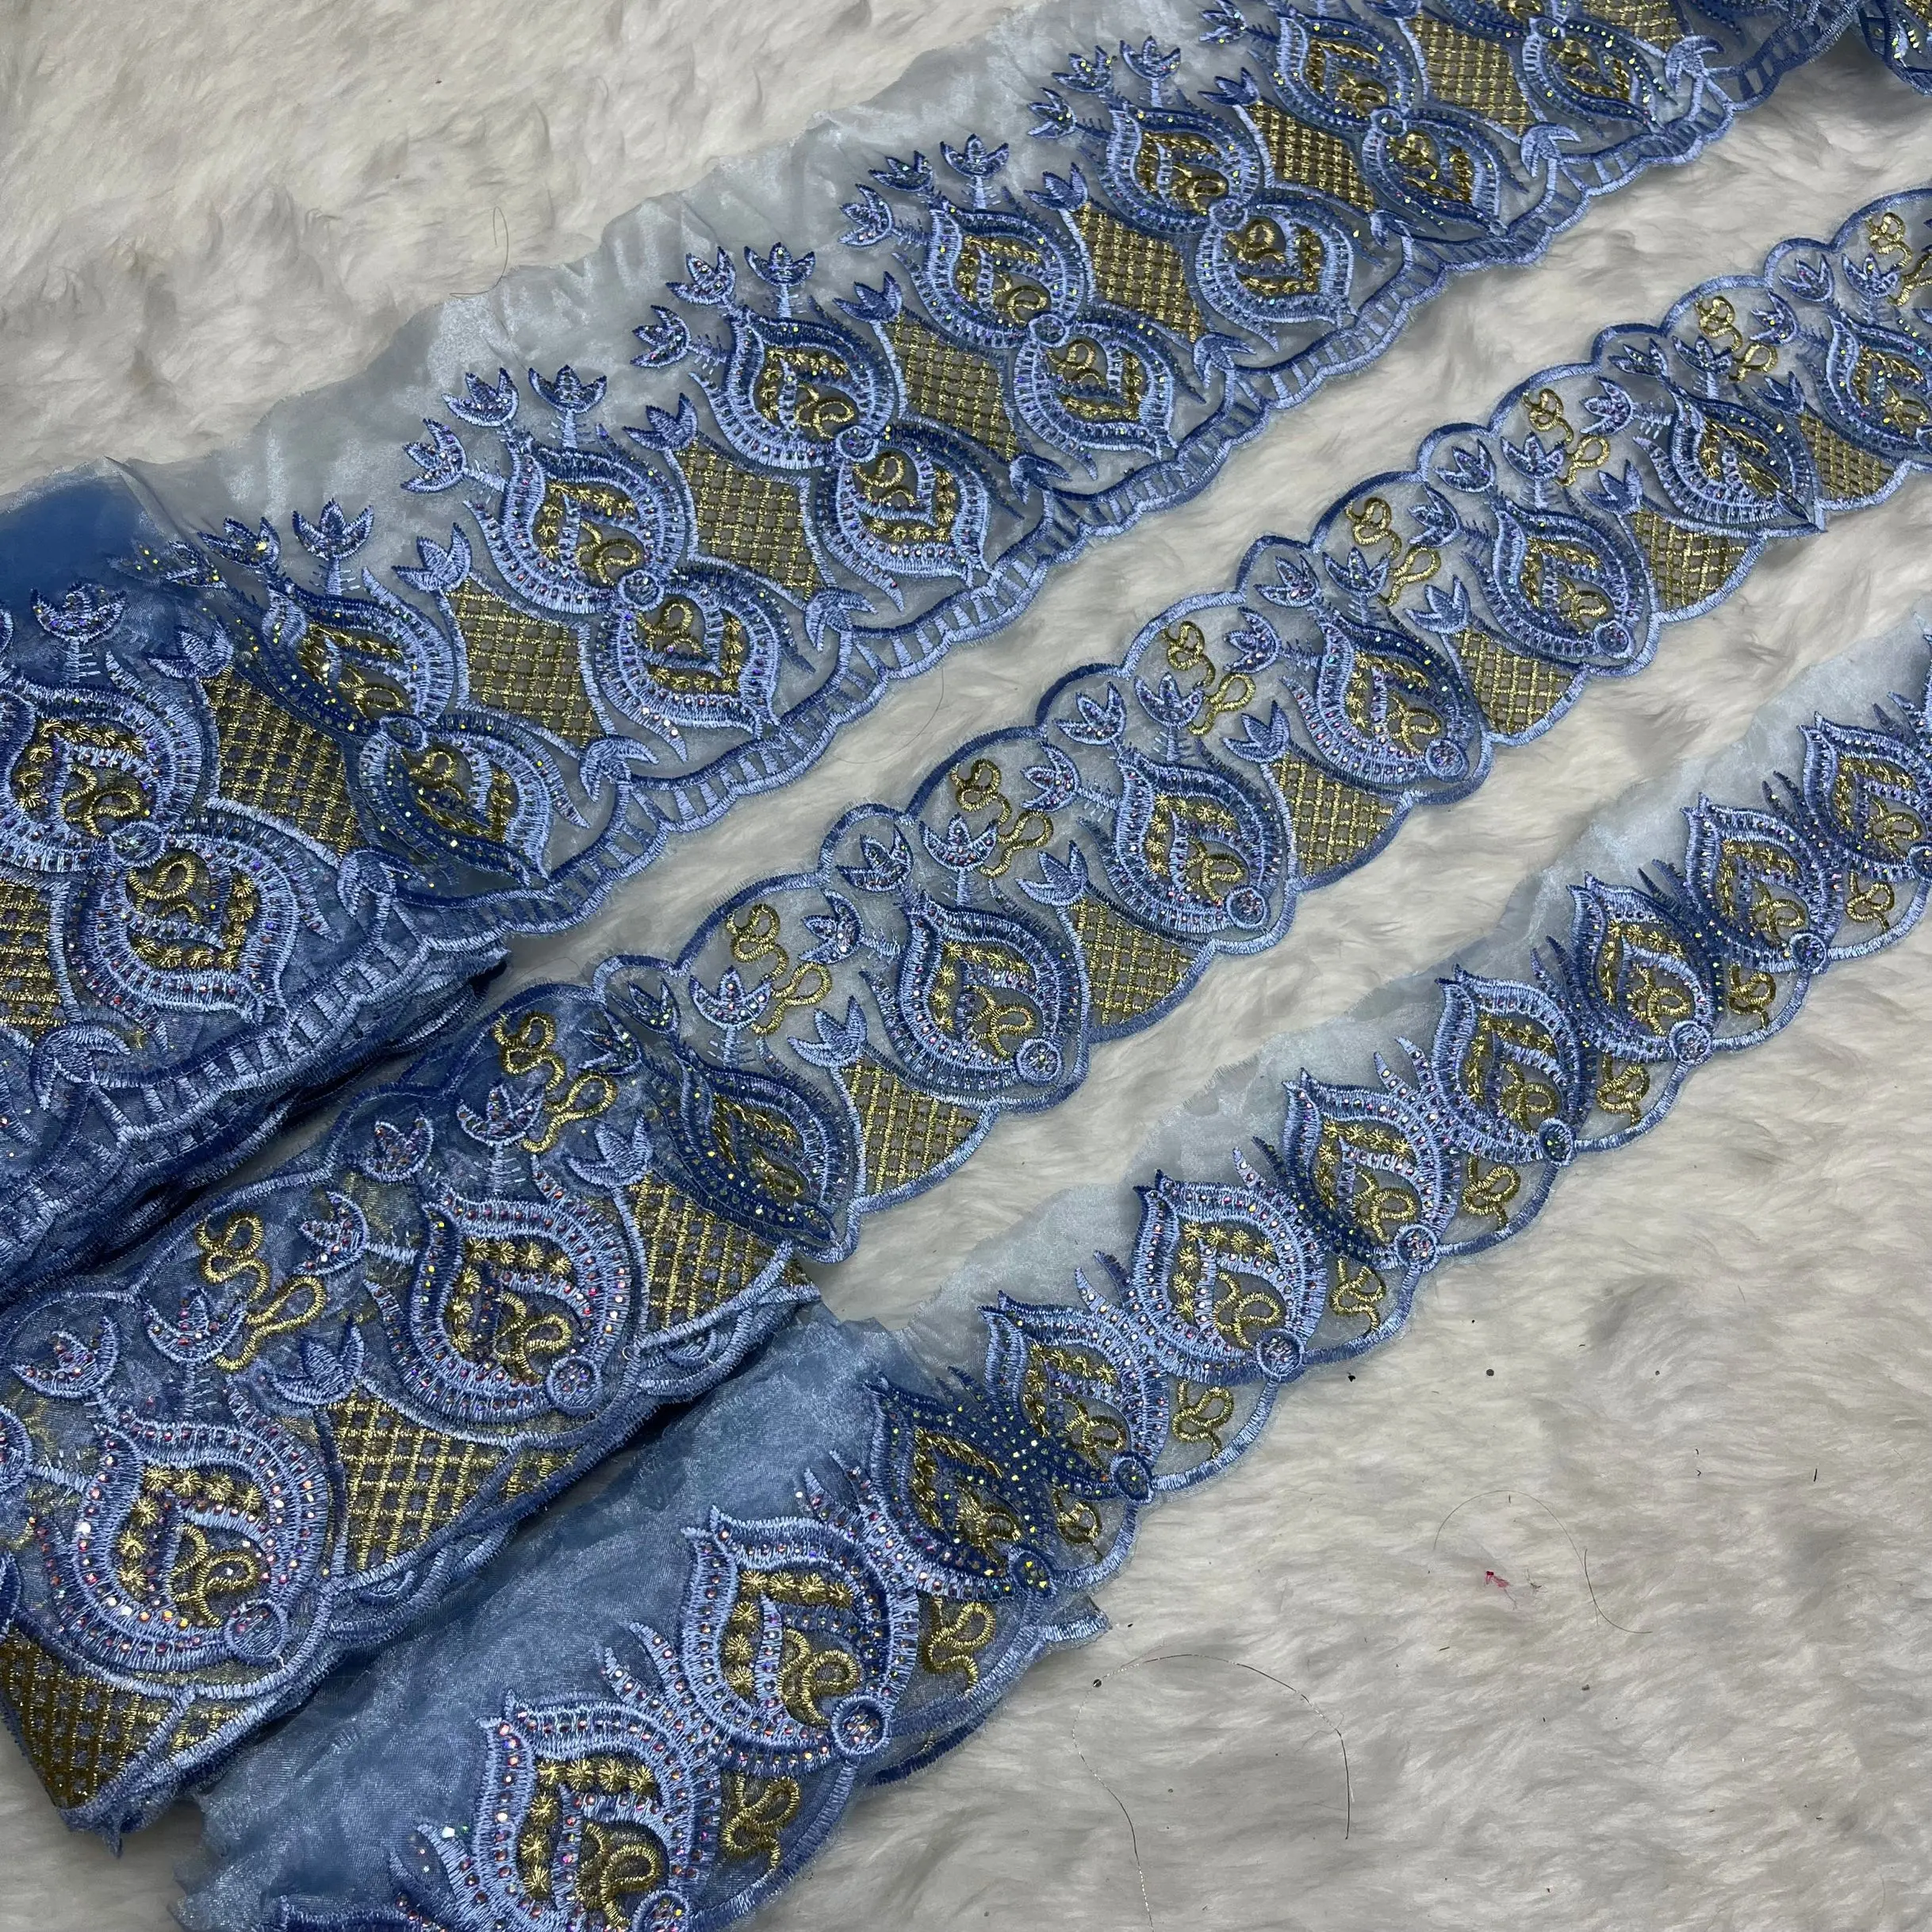 15 Yards Embroidered Ribbon For Crafts Nigeria Women Wedding Clotthing Decoration Guipure Ribbon Dry Laces DIY Craft&Sewing